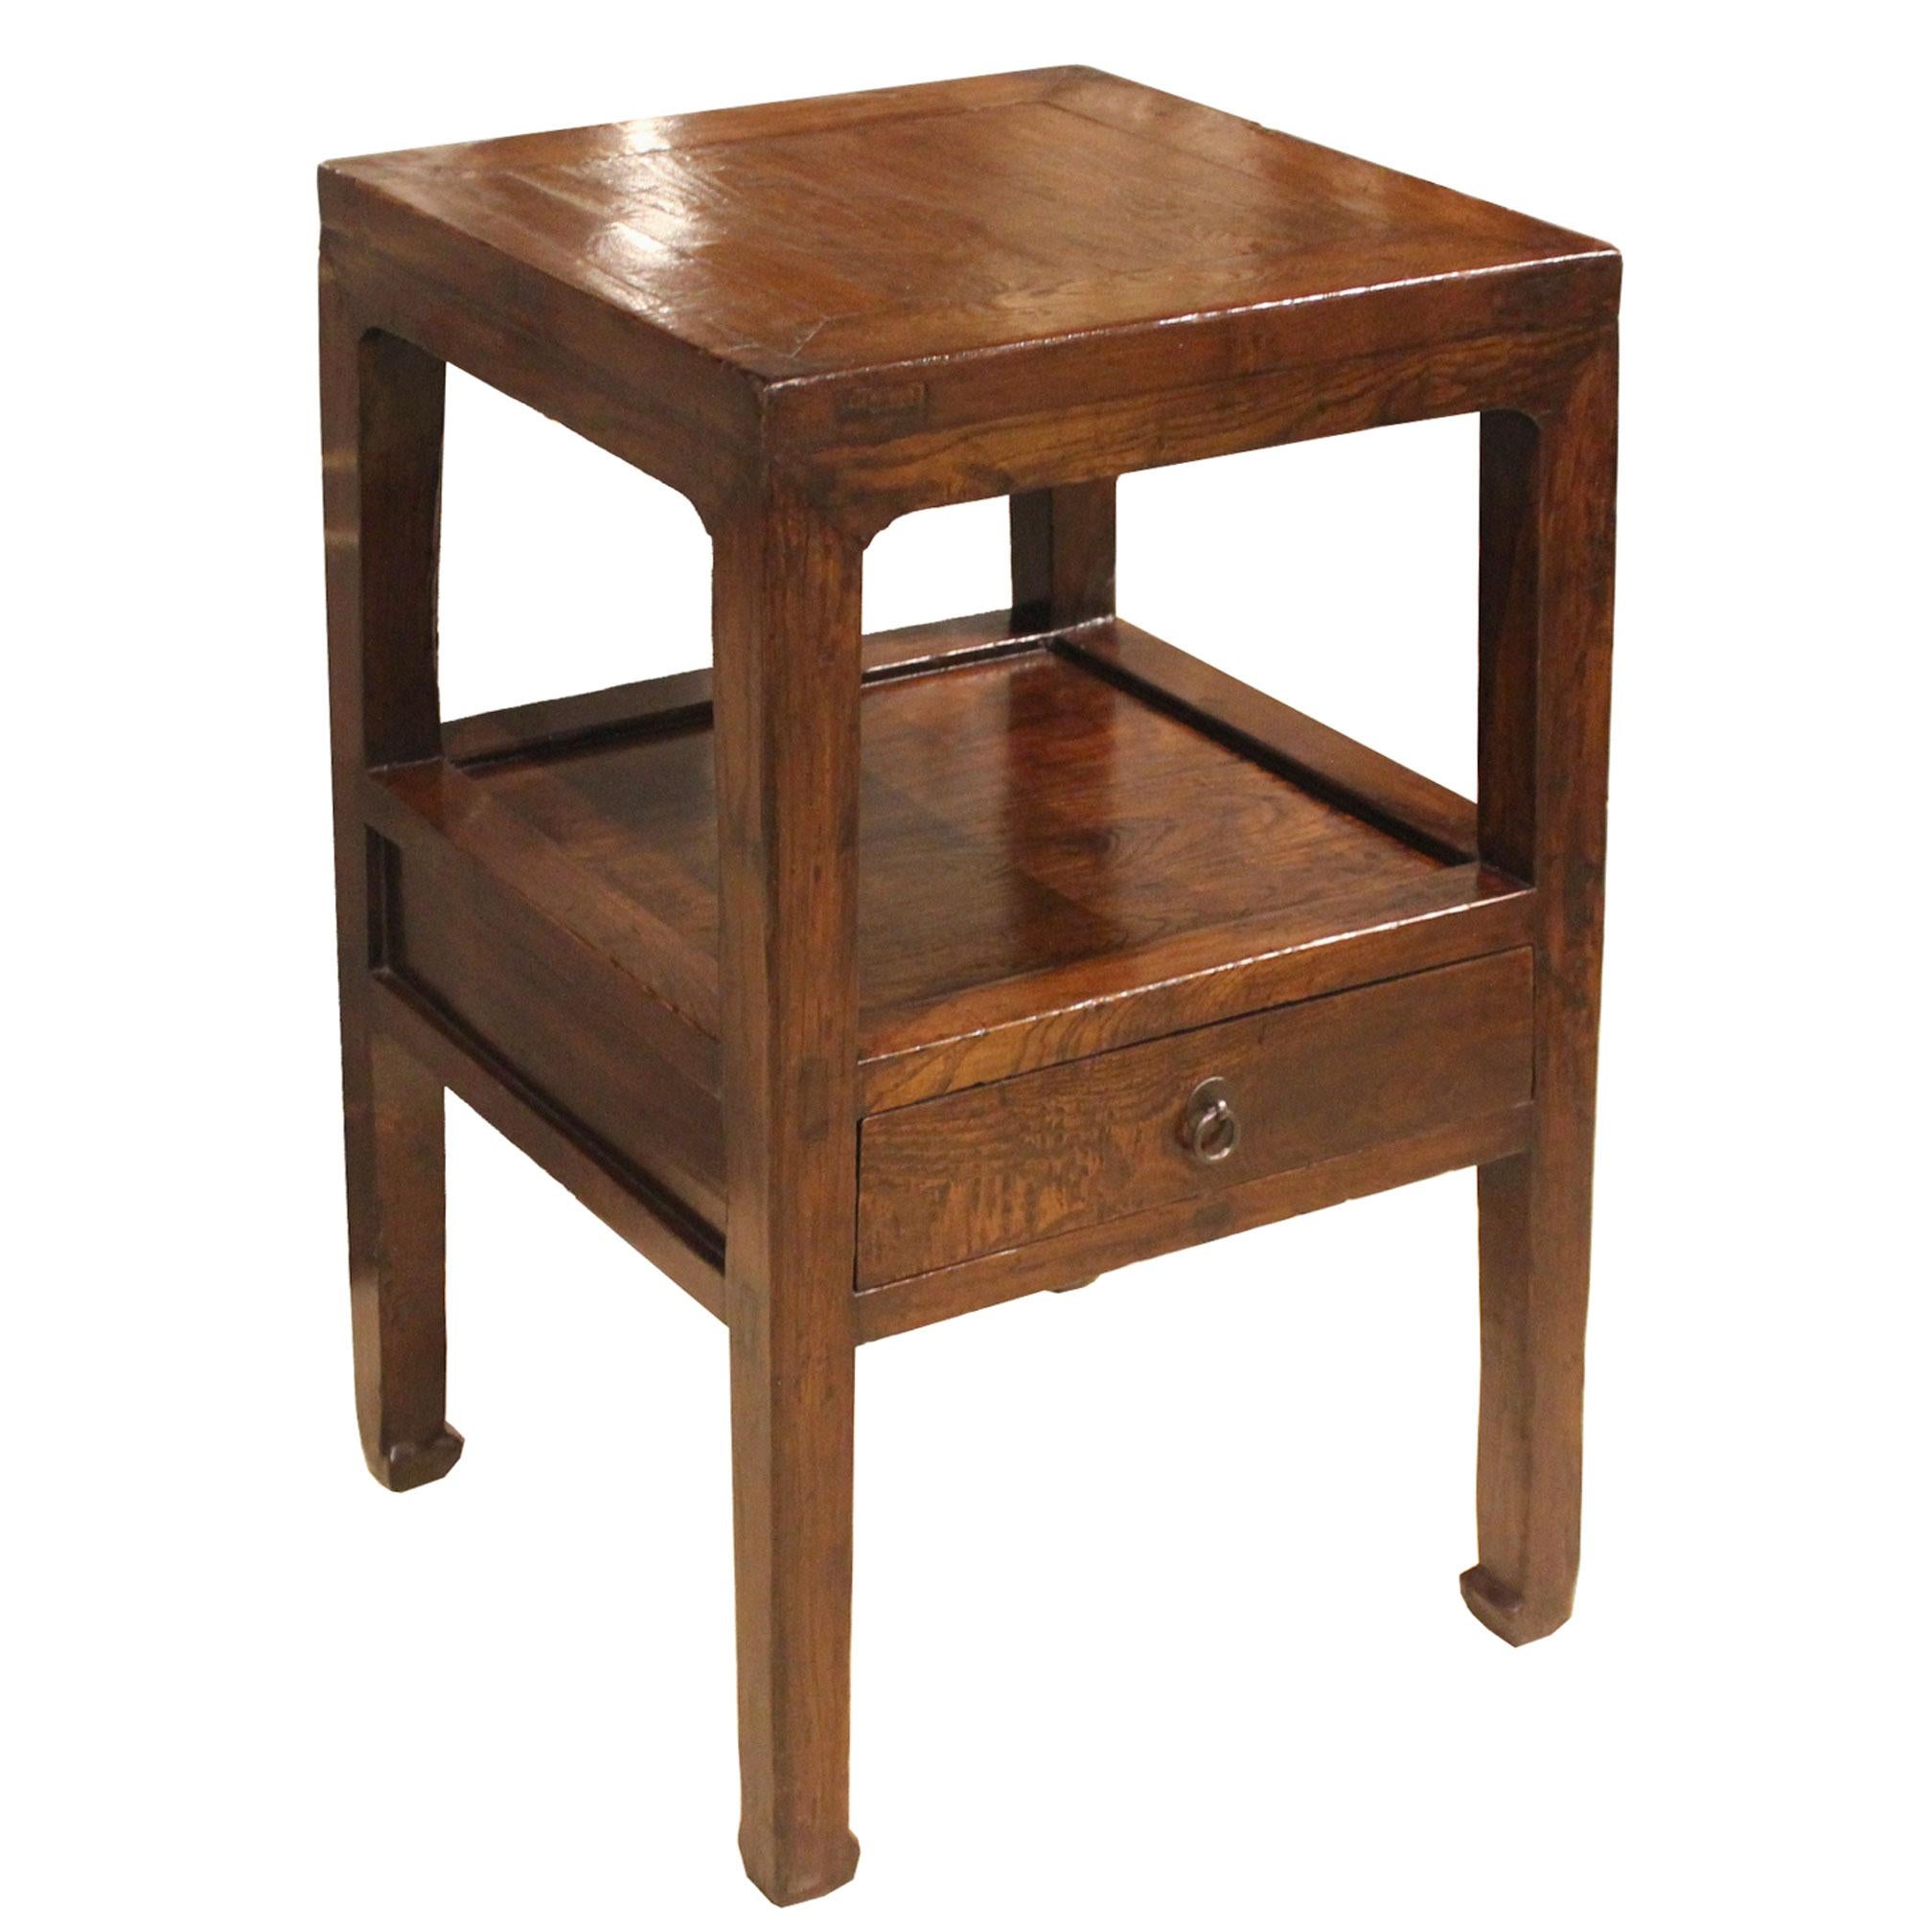 Unusual vintage side table from Shanxi, China with beautiful elm grain, shelf, drawer, and horse hoof-style feet. Perfect between two lounge chairs or next to a bed. New hardware.